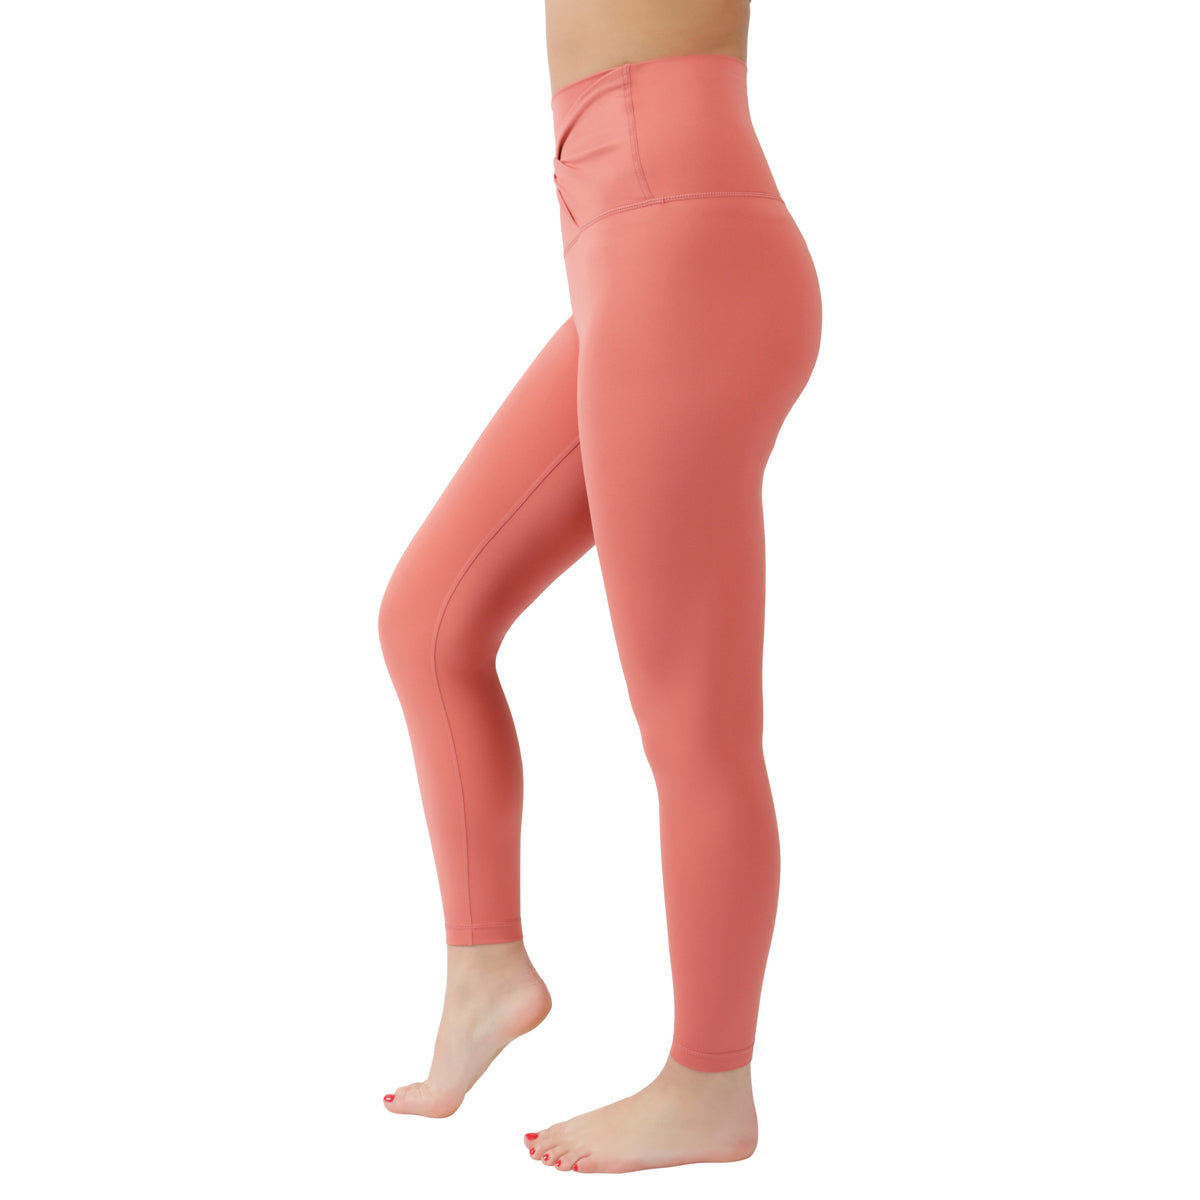 Yogalicious Pink Yoga Pants Size S - 86% off